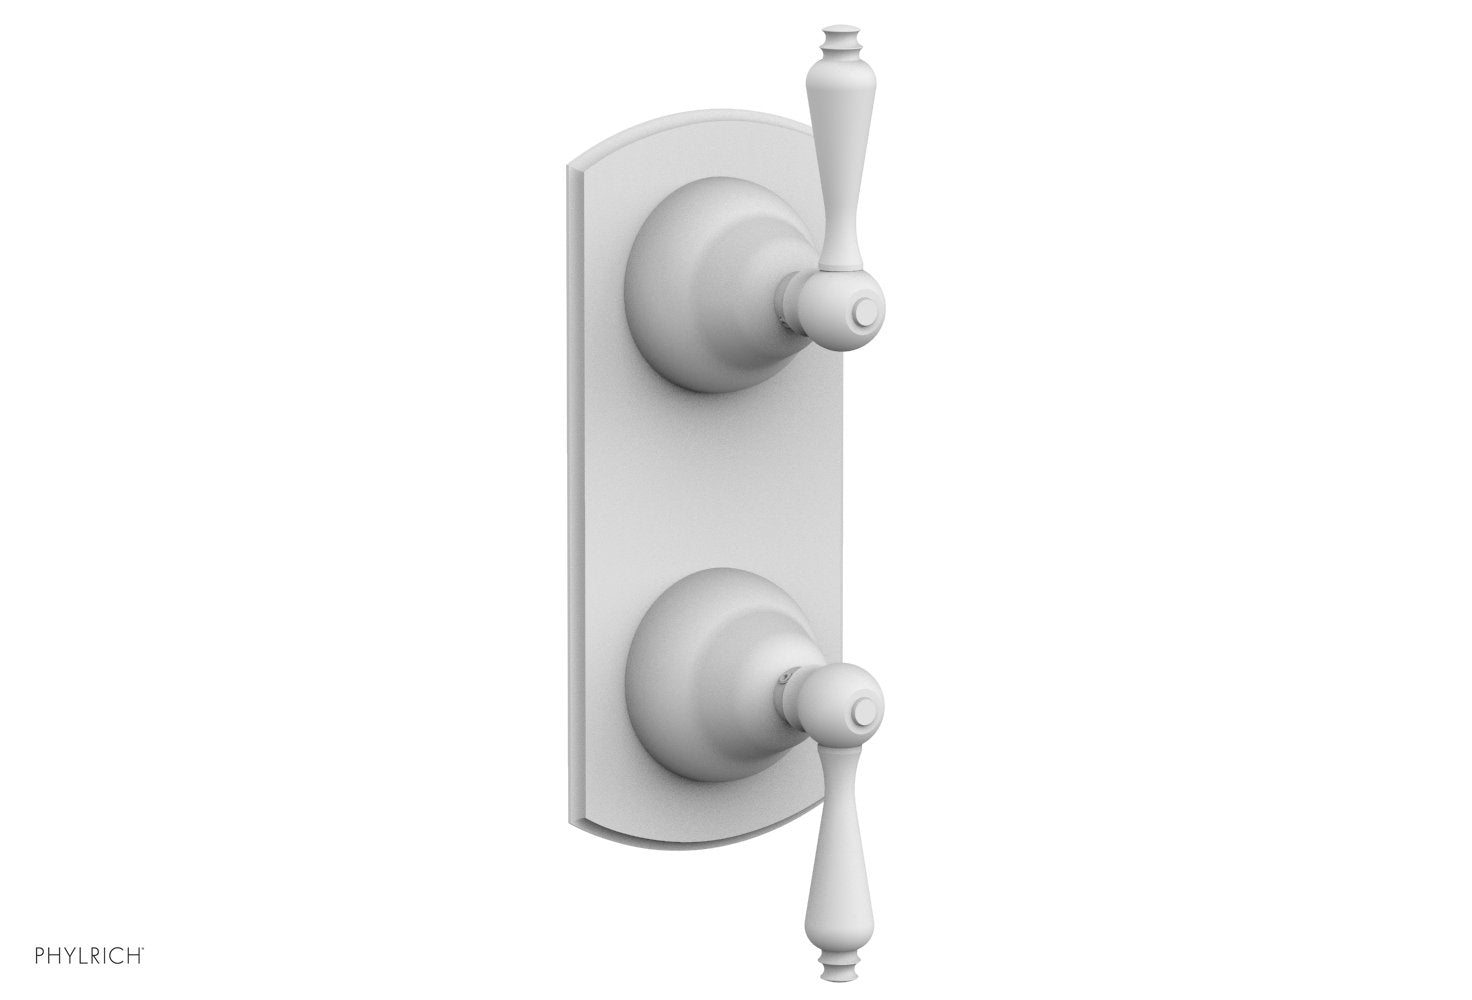 Phylrich REVERE & SAVANNAH 1/2" Thermostatic Valve with Volume Control or Diverter